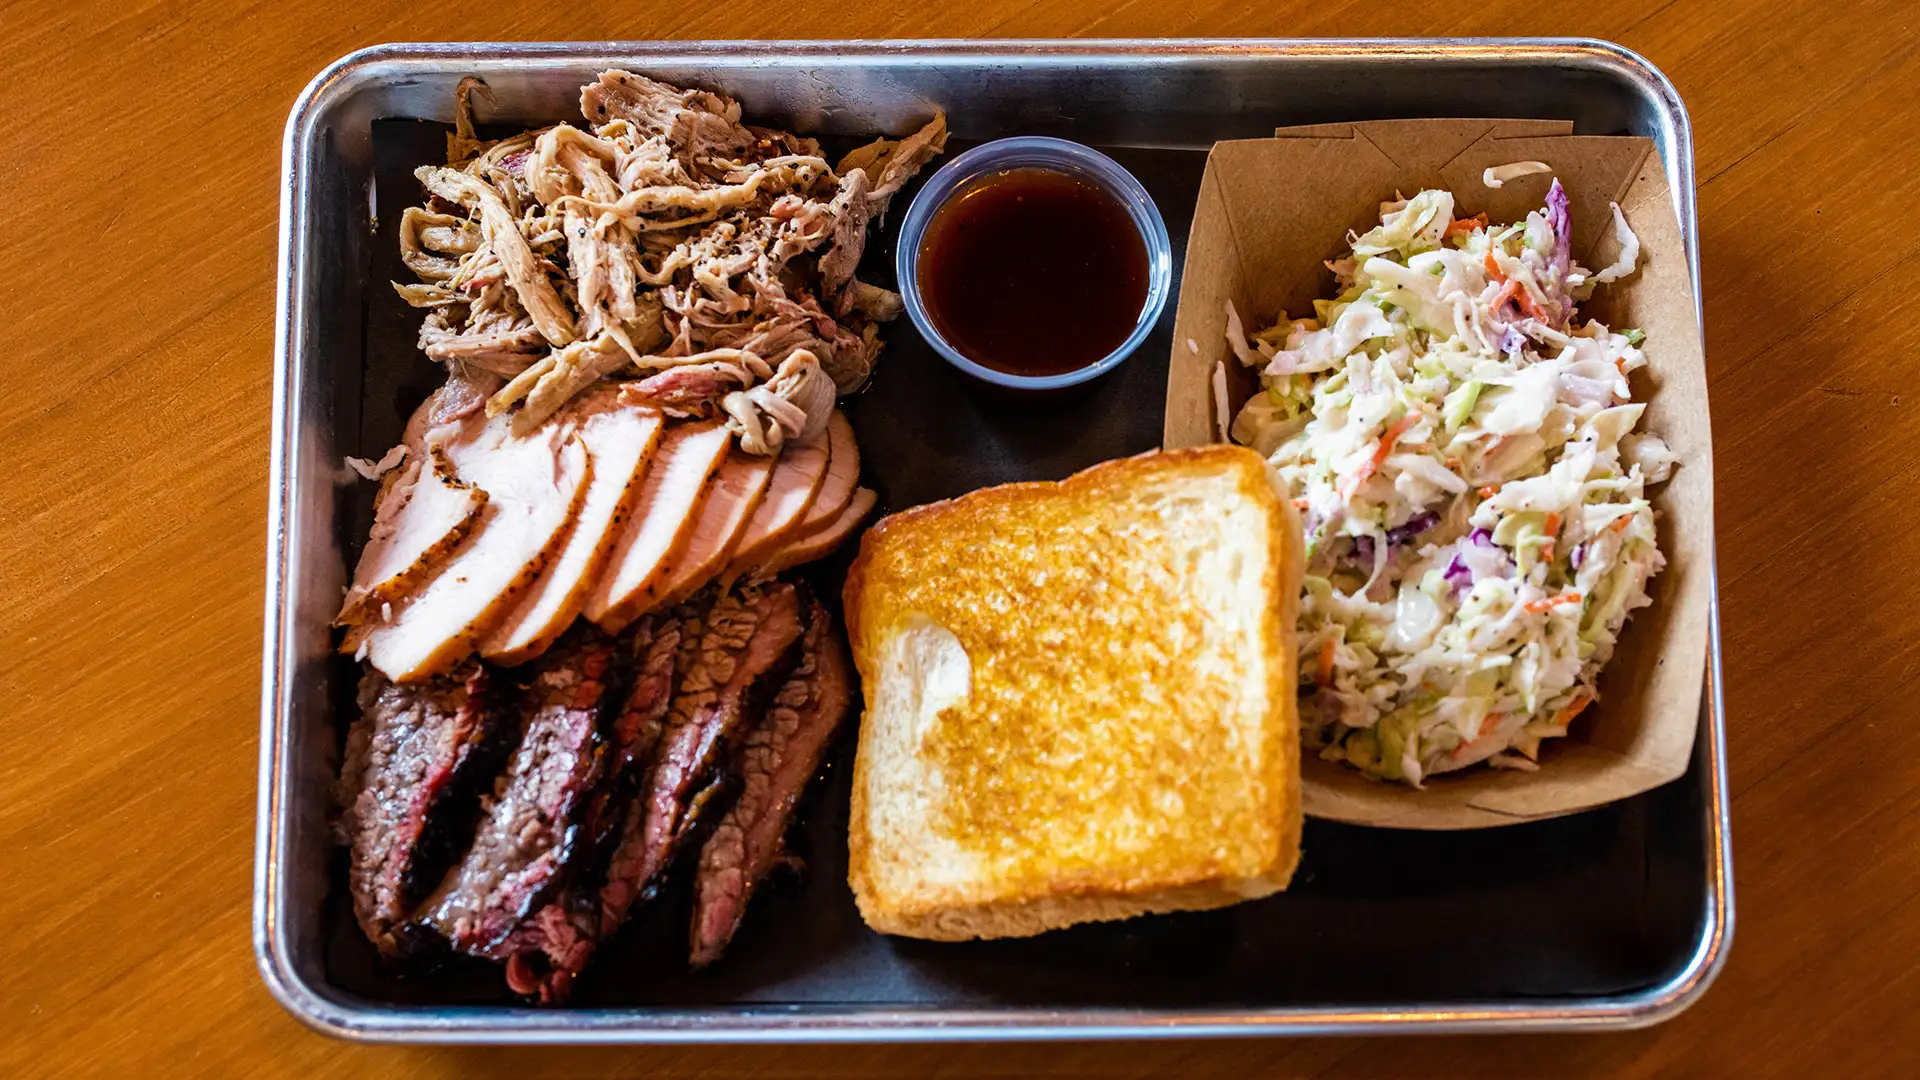 3 meat plate with pulled pork, turkey, brisket, and sides